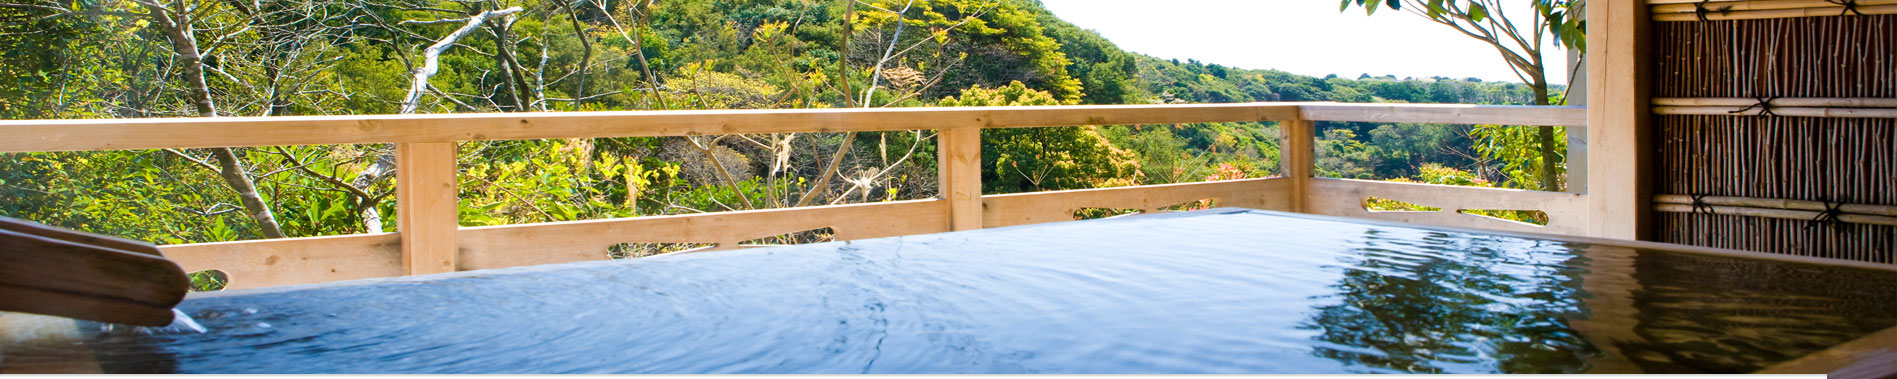 Minami Aso Onsen Hotels with Guaranteed Best Rate